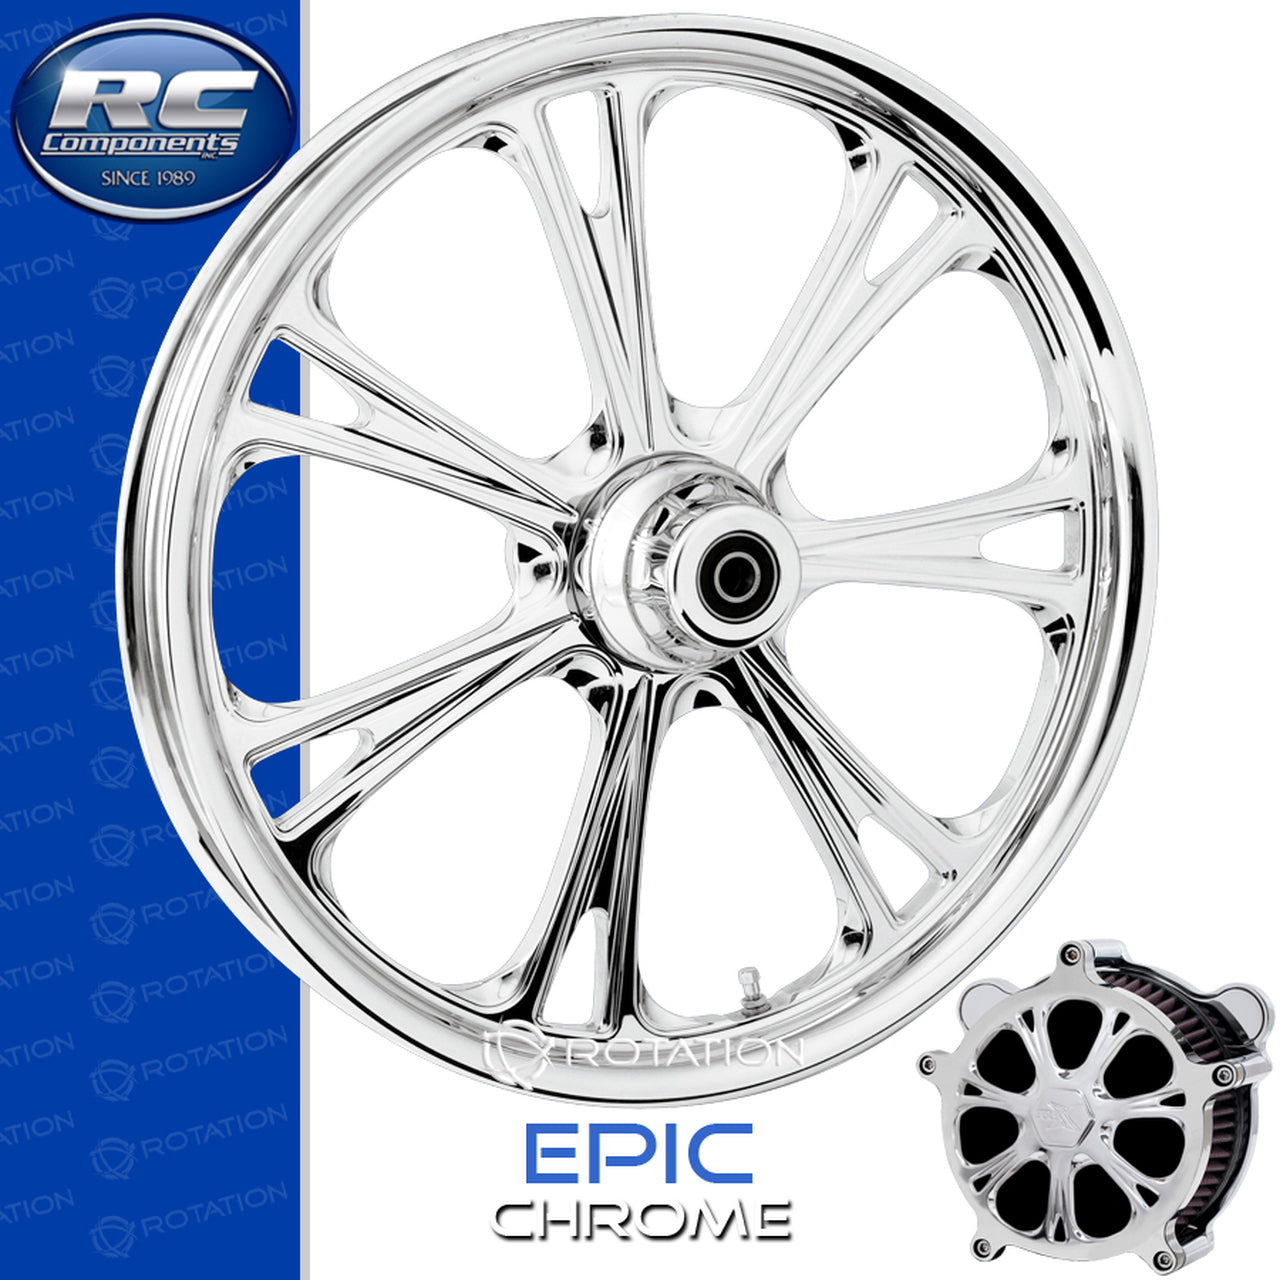 RC Components Epic Chrome Touring Wheel